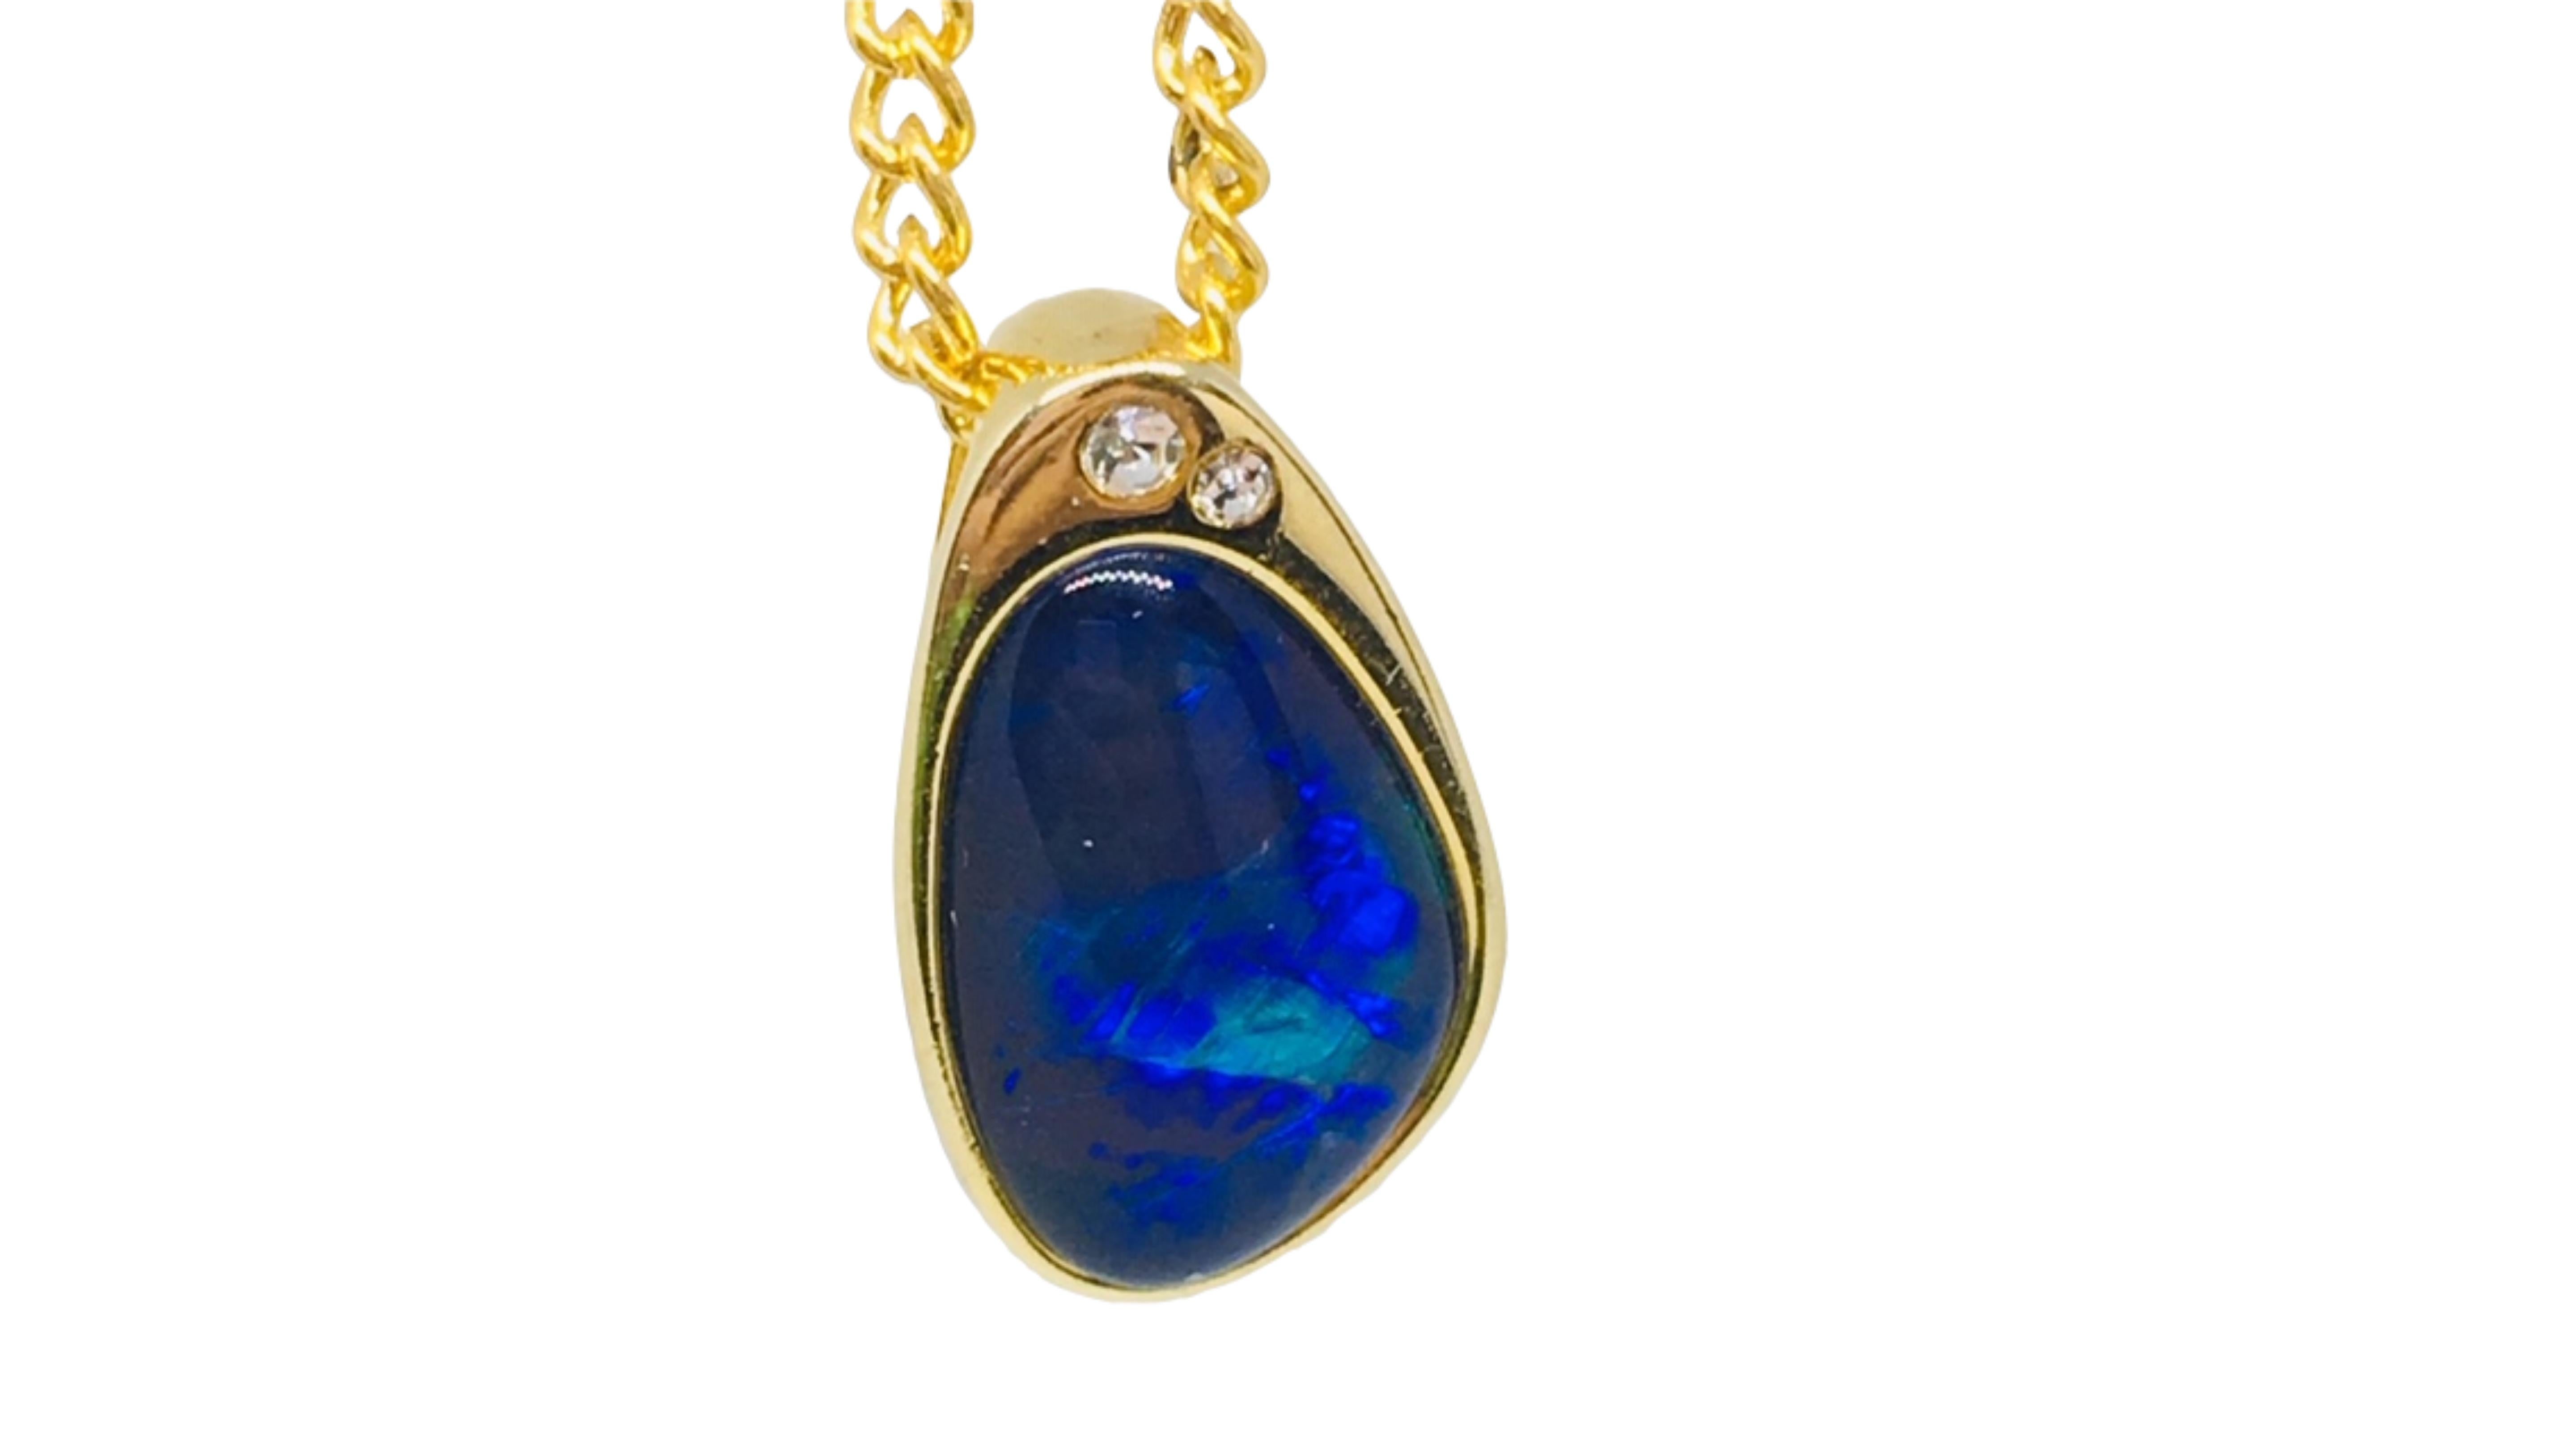 
Australian Opal Necklace Yellow Gold Plated  shows off this Bright Blue Color and you may see flashes of Green in too. It does stand out with the accent stones at the top too.  From Coober Pedy South Australia. 

